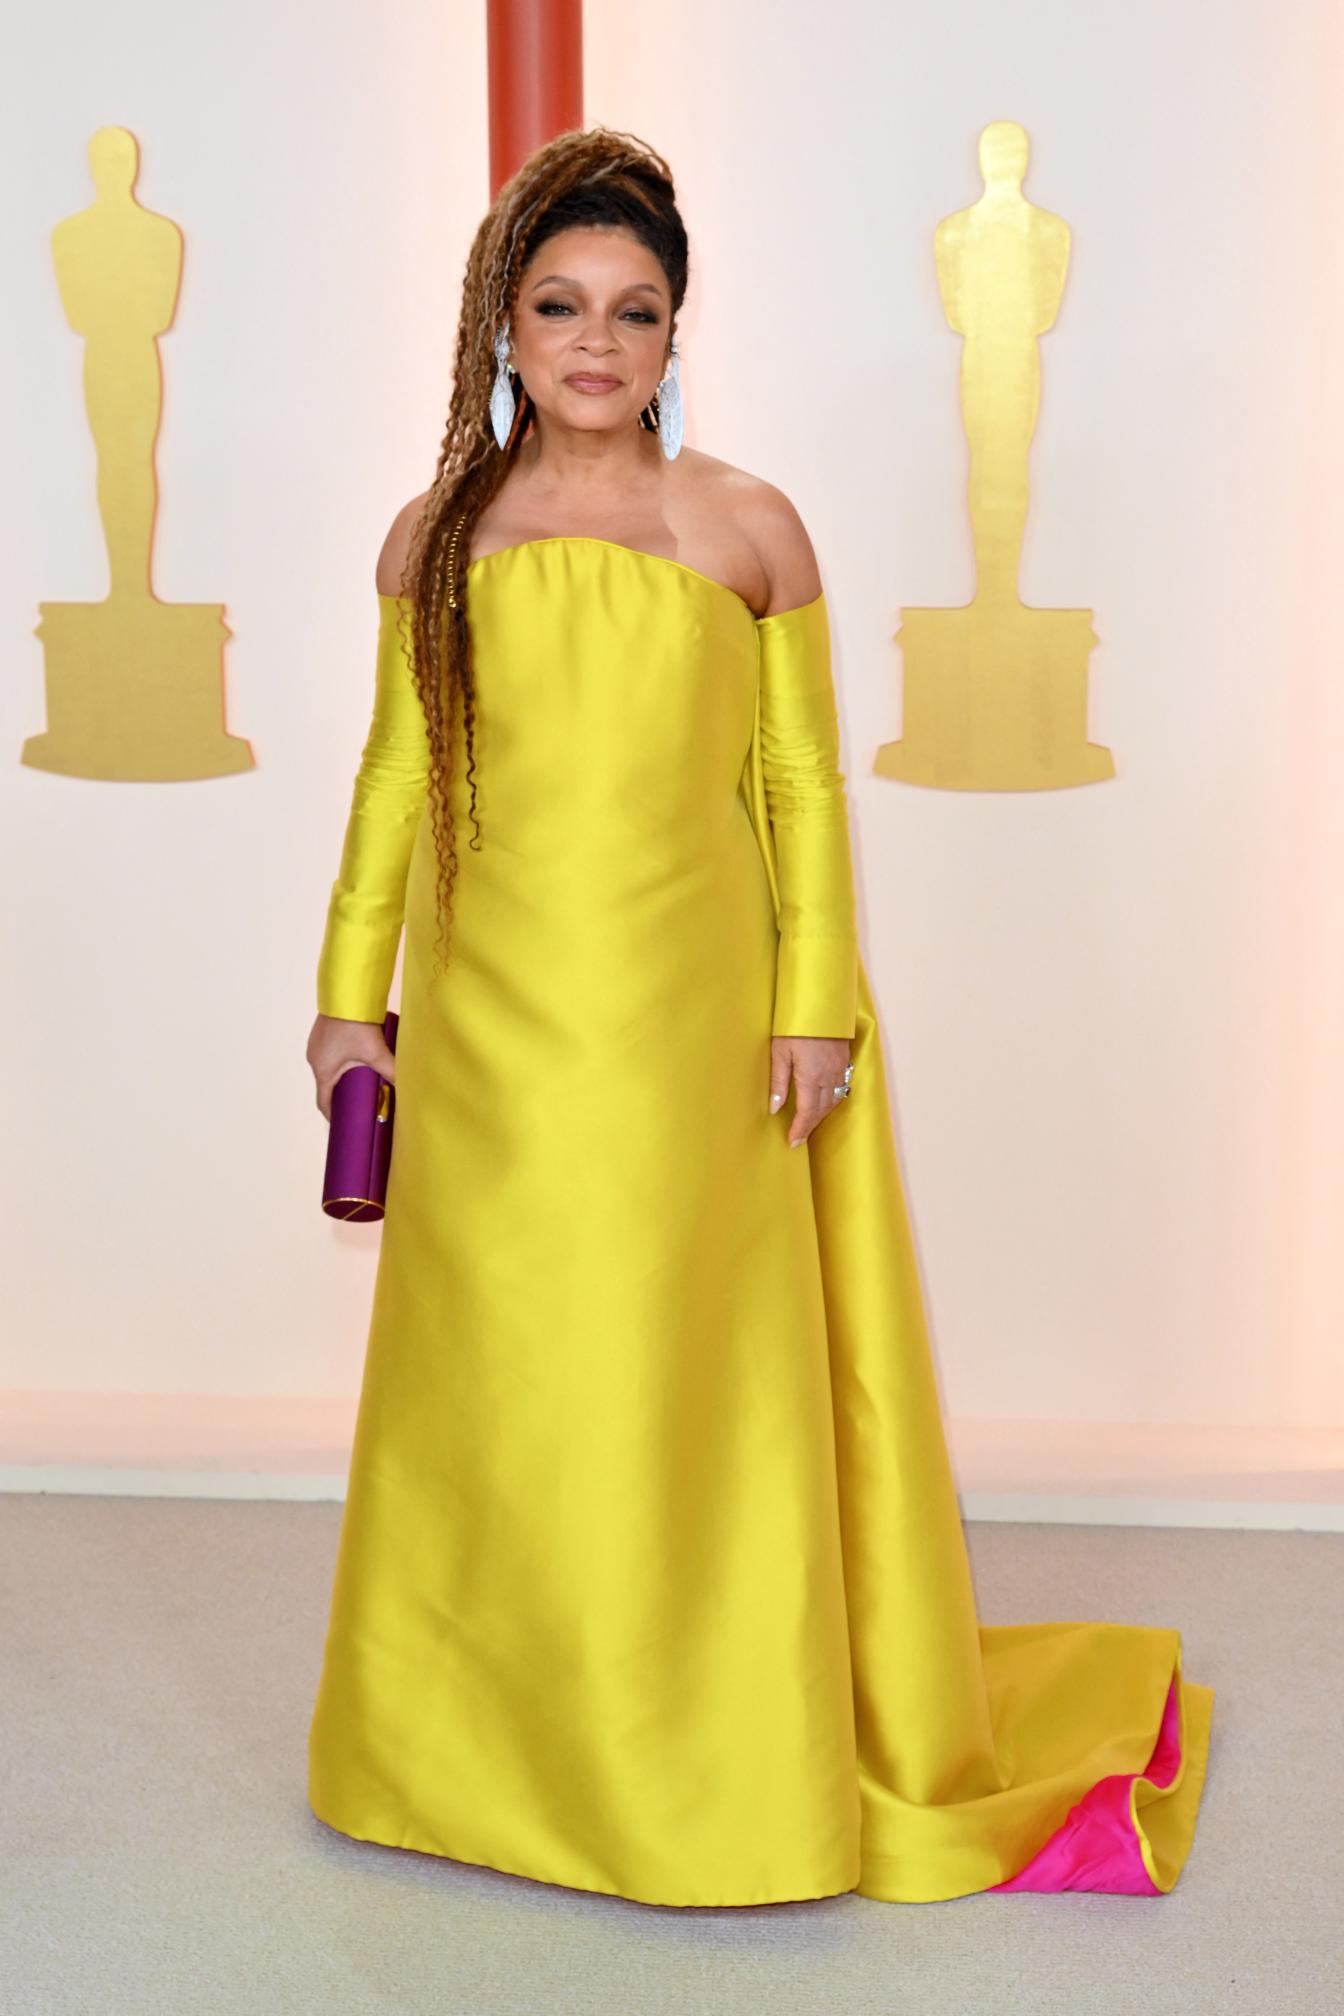 US costume designer Ruth E. Carter attends the 95th Annual Academy Awards at the Dolby Theatre in Hollywood